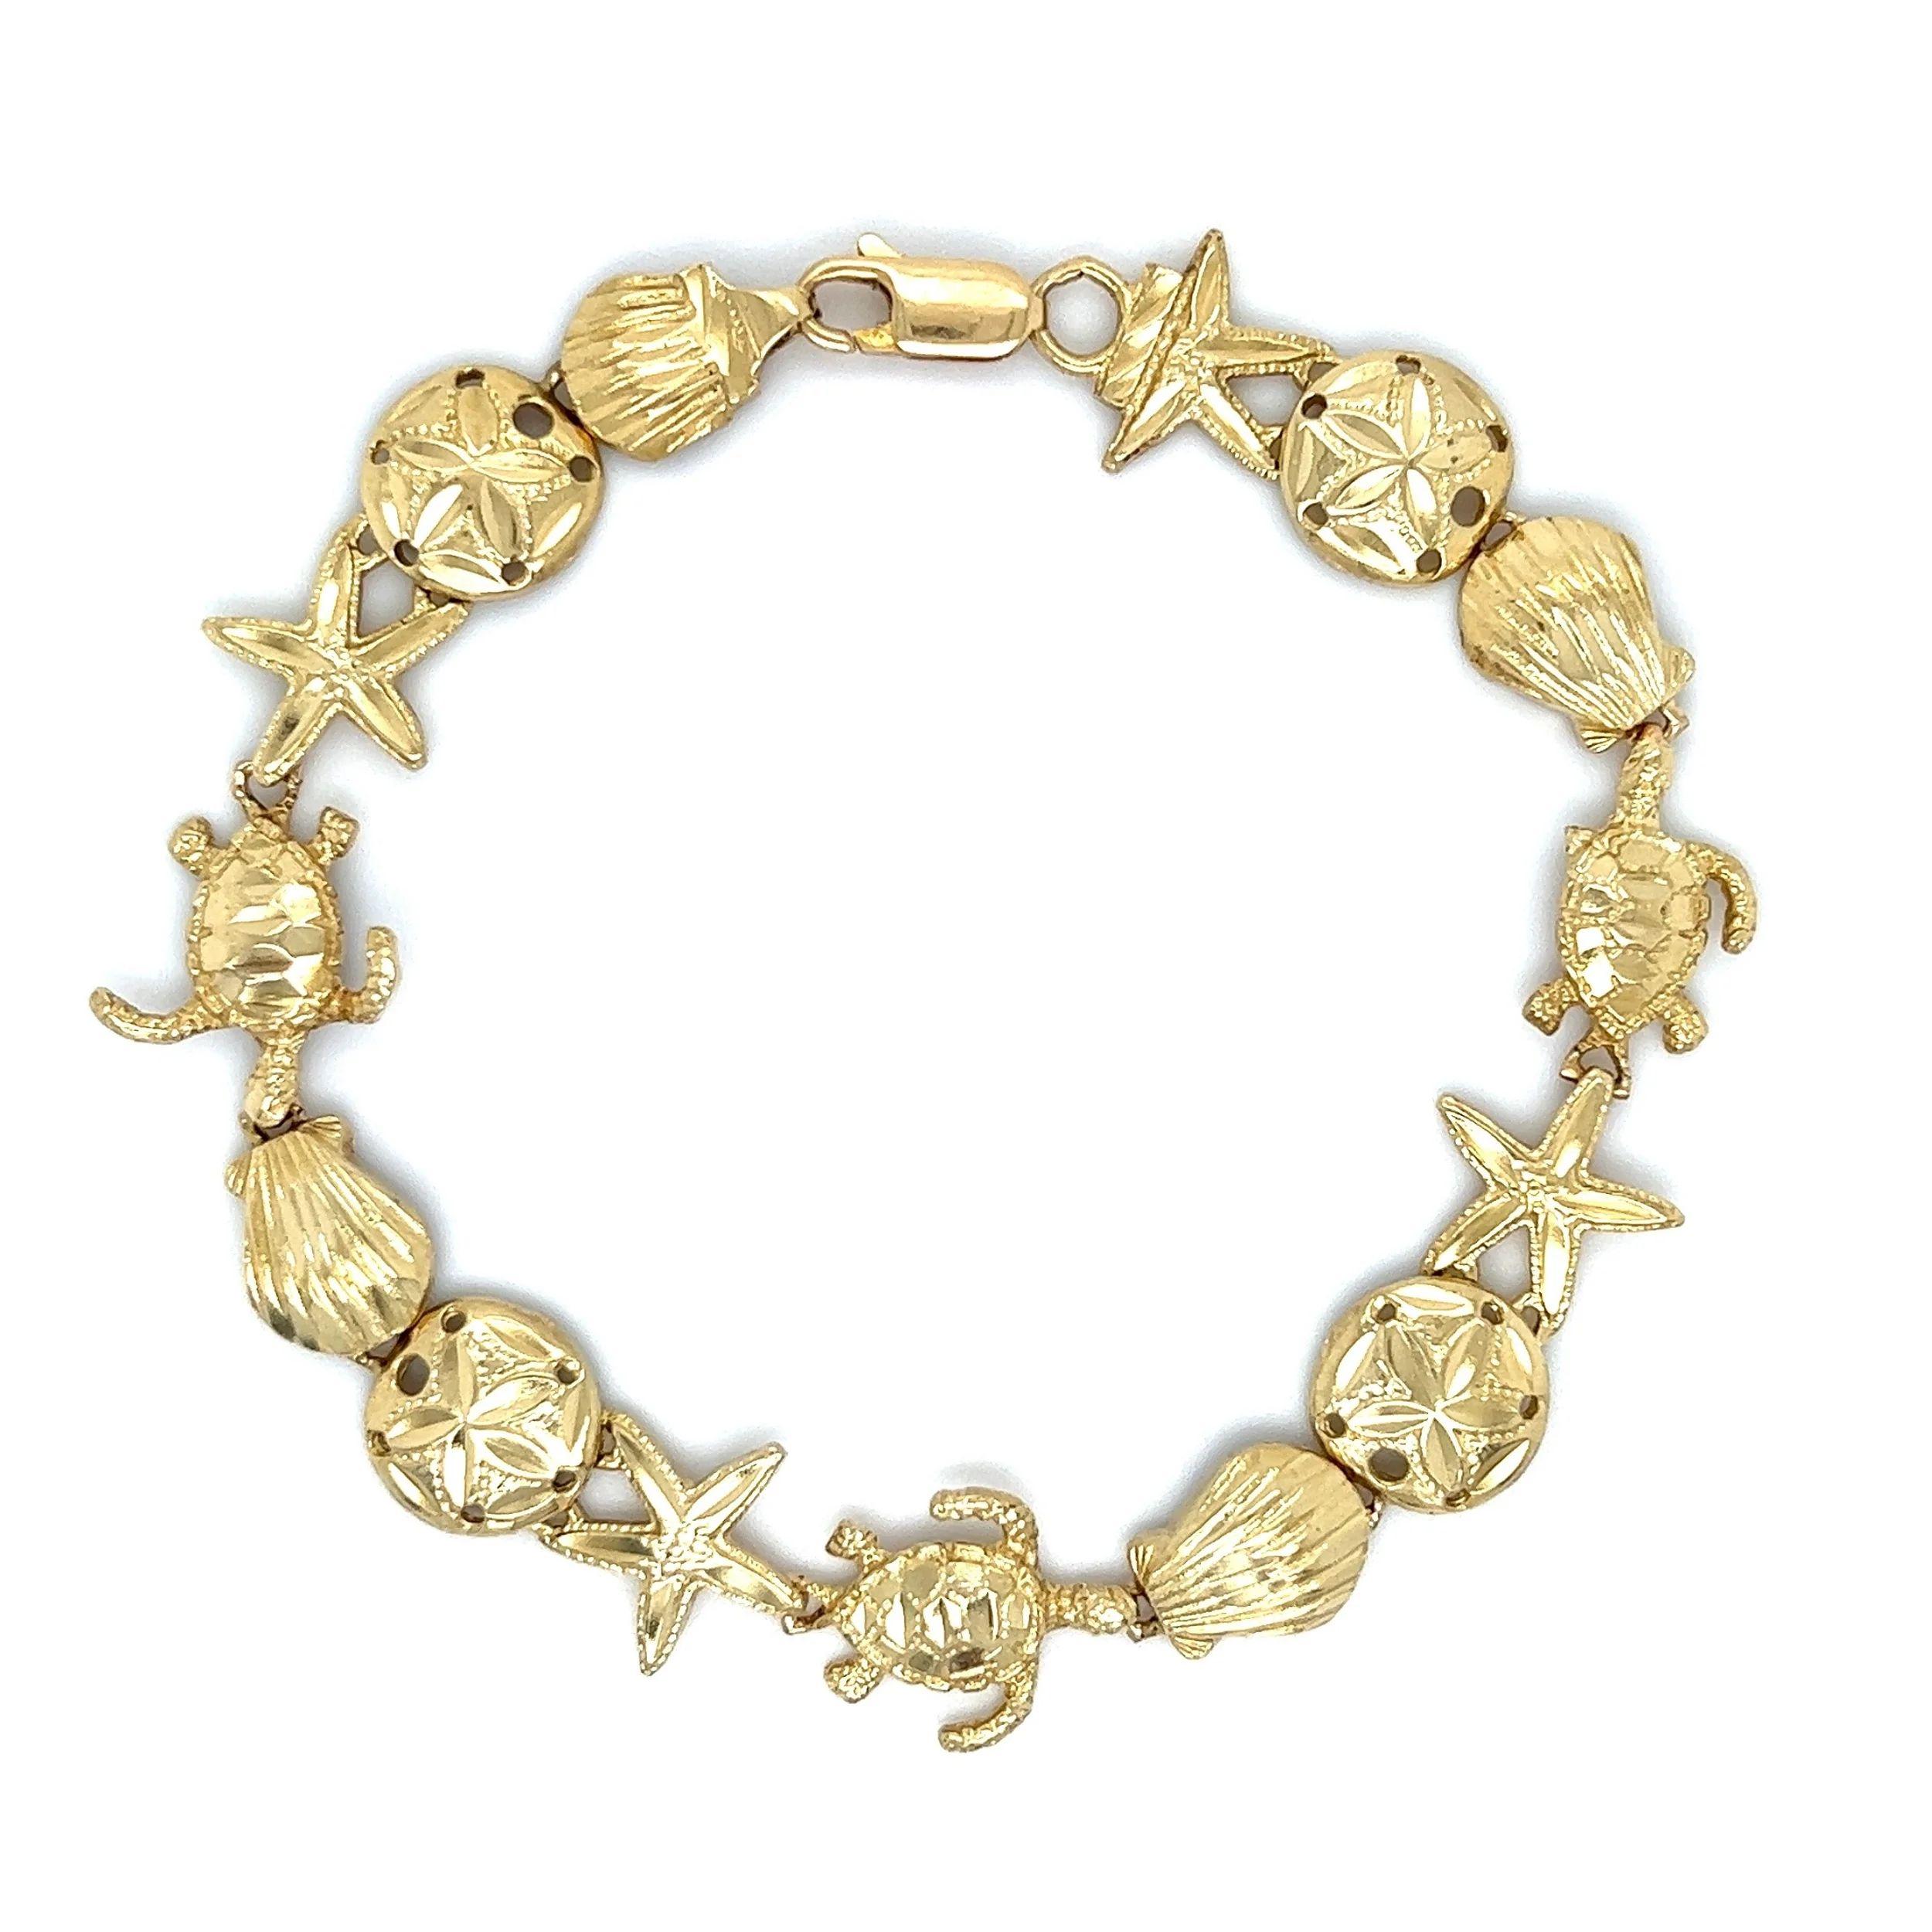 Simply Beautiful! Featuring Sea Life, Starfish, Sand Dollar Seashell and Turtle Gold Link Bracelet. Hand crafted in 14K Yellow Gold. Measuring approx. 7.5